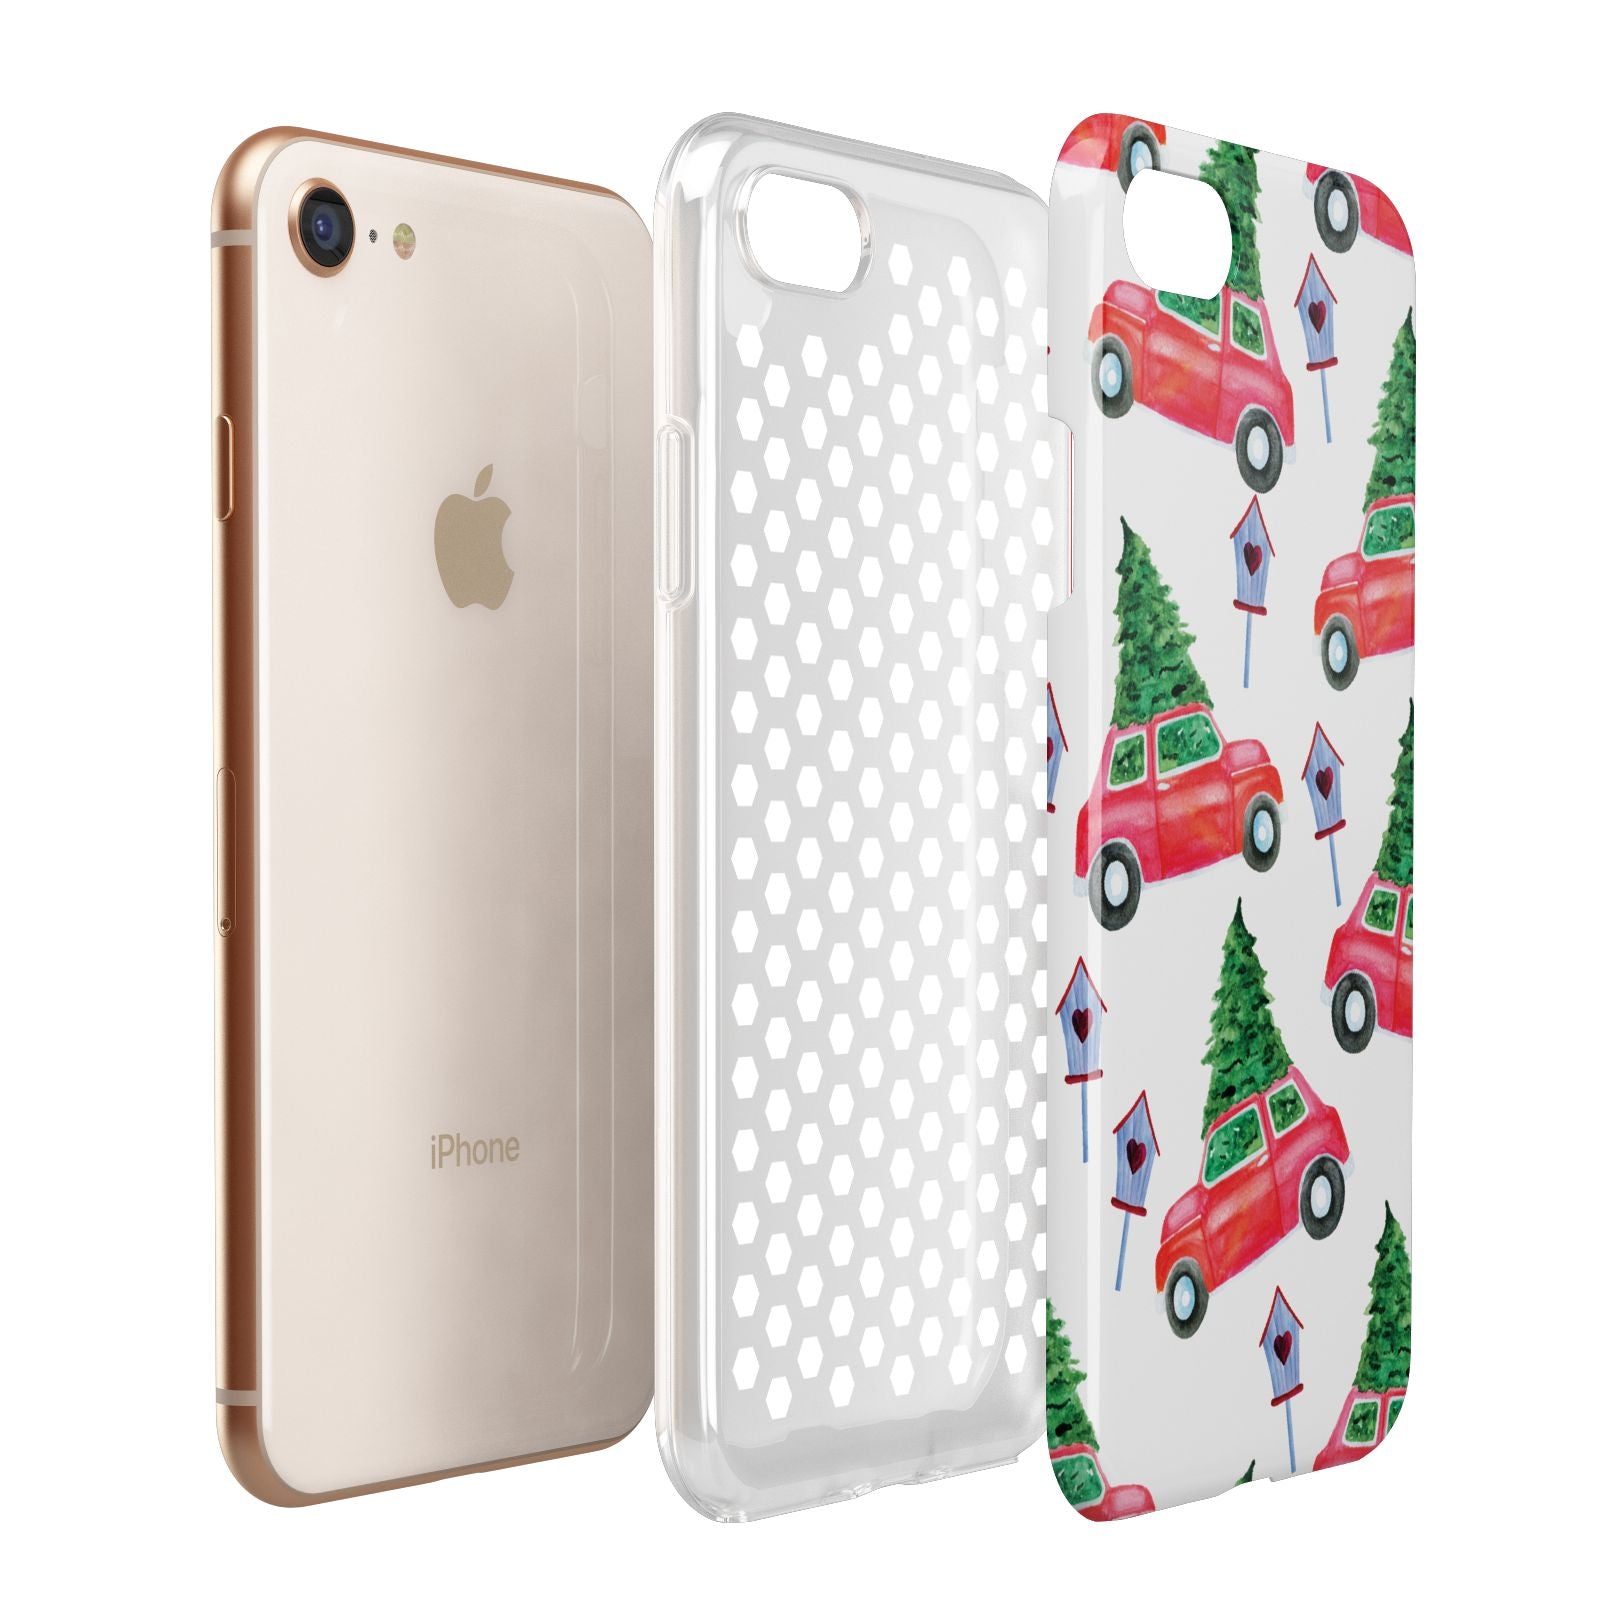 Driving home for Christmas Apple iPhone 7 8 3D Tough Case Expanded View